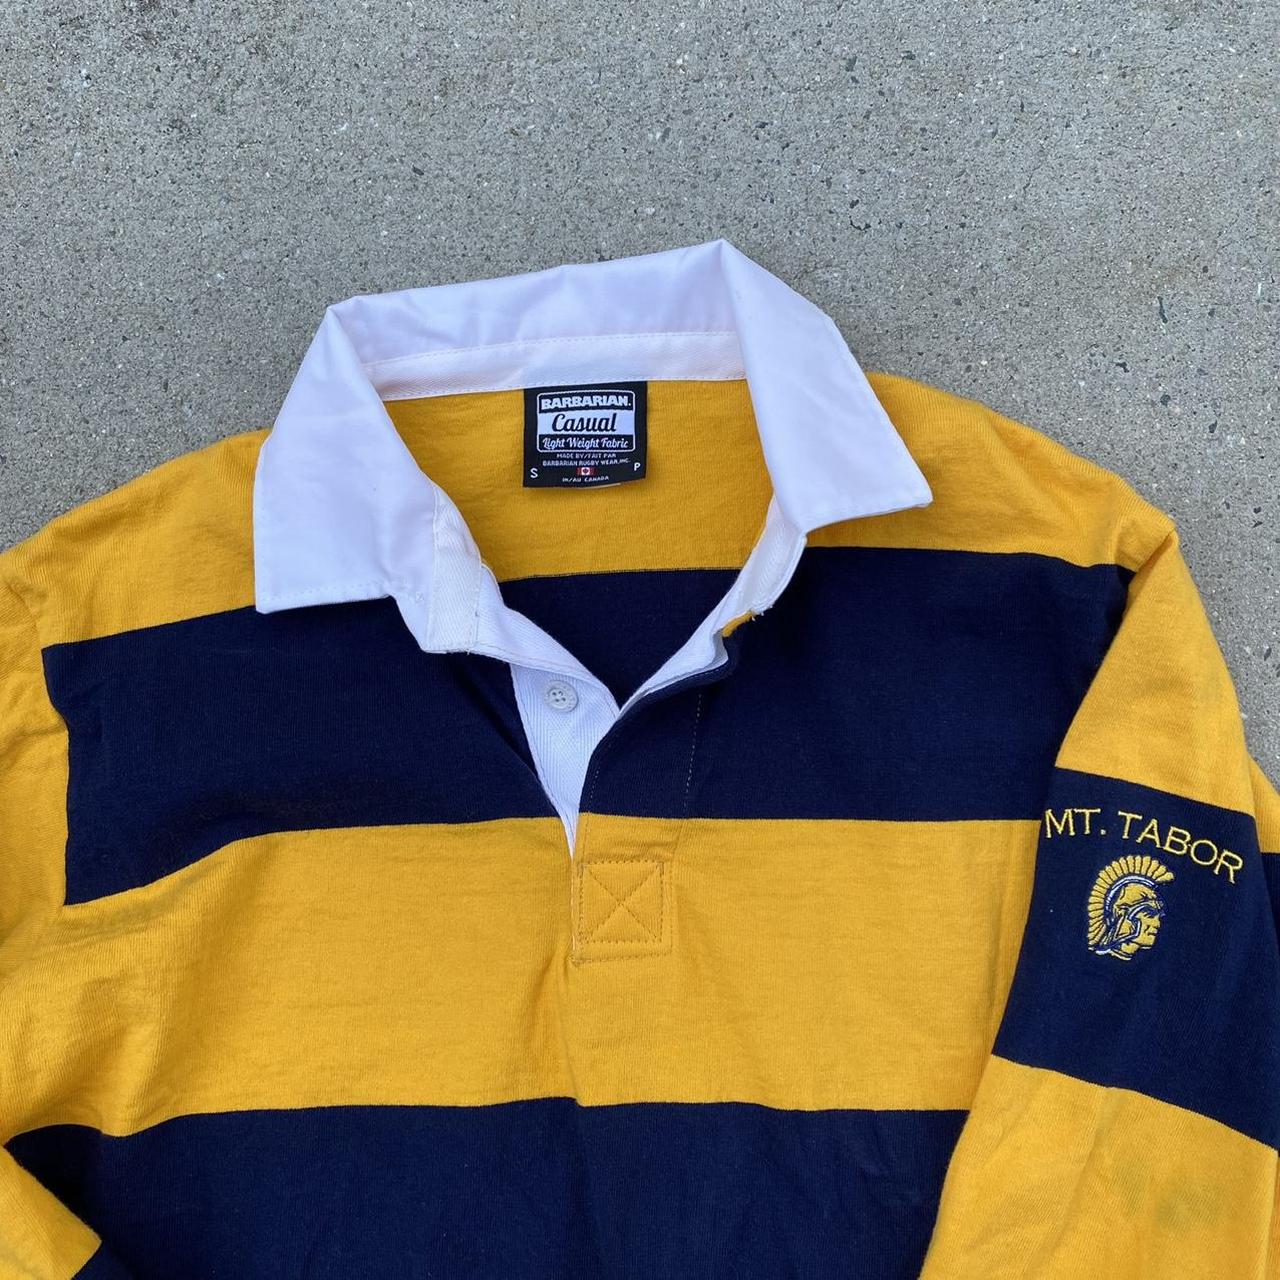 Product Image 2 - Retro barbarian striped rugby shirt.